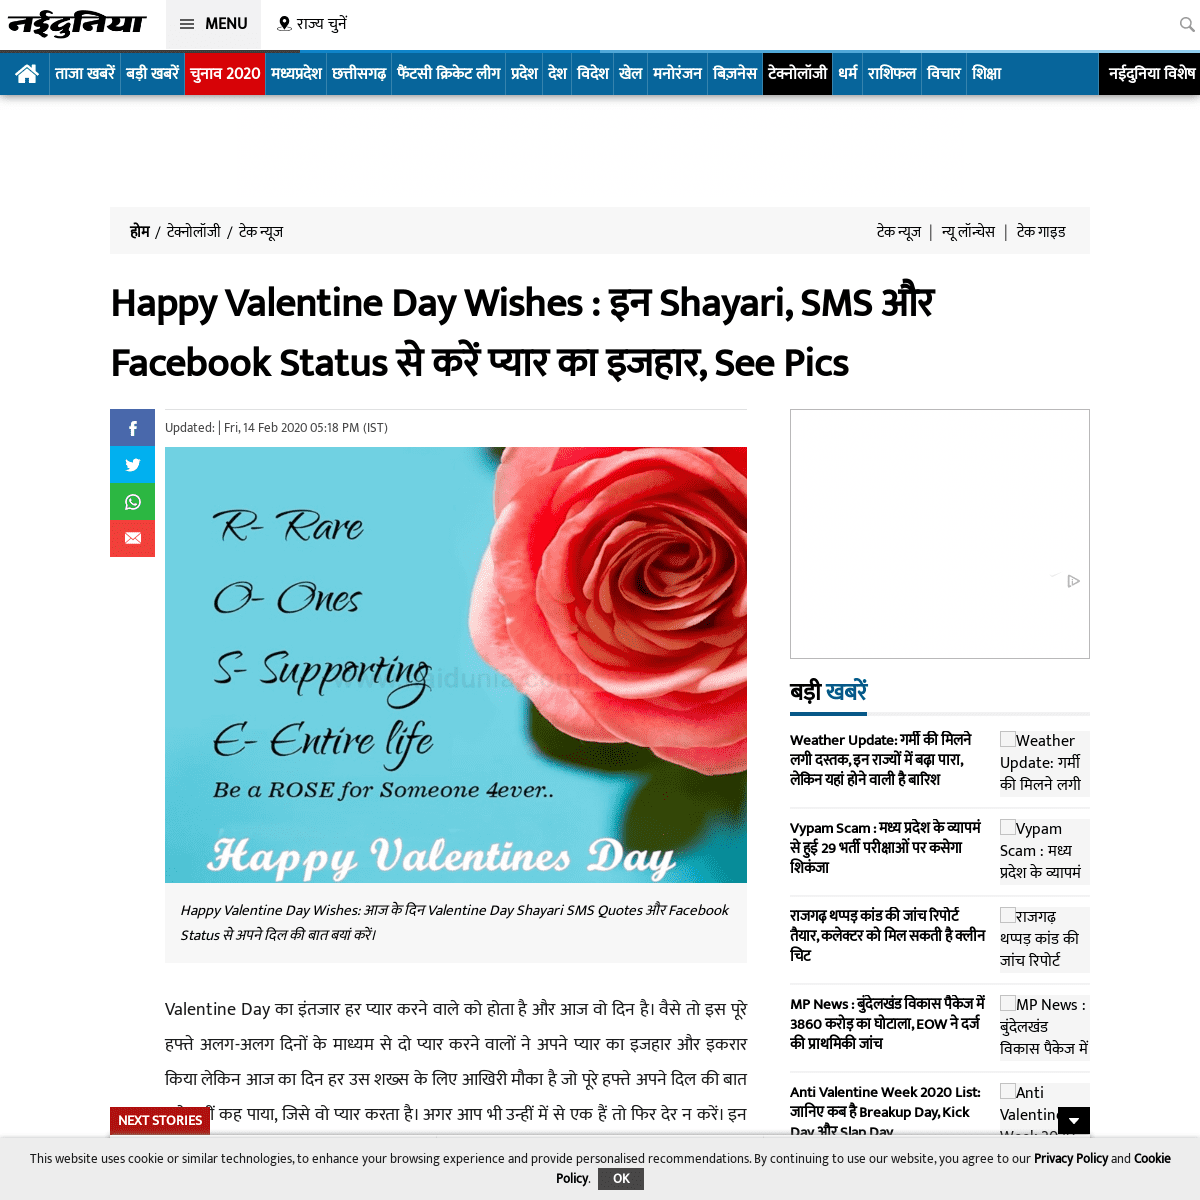 A complete backup of www.naidunia.com/technology/tech-happy-valentine-day-2020-wishes-shayari-images-quotes-facebook-and-whatsap